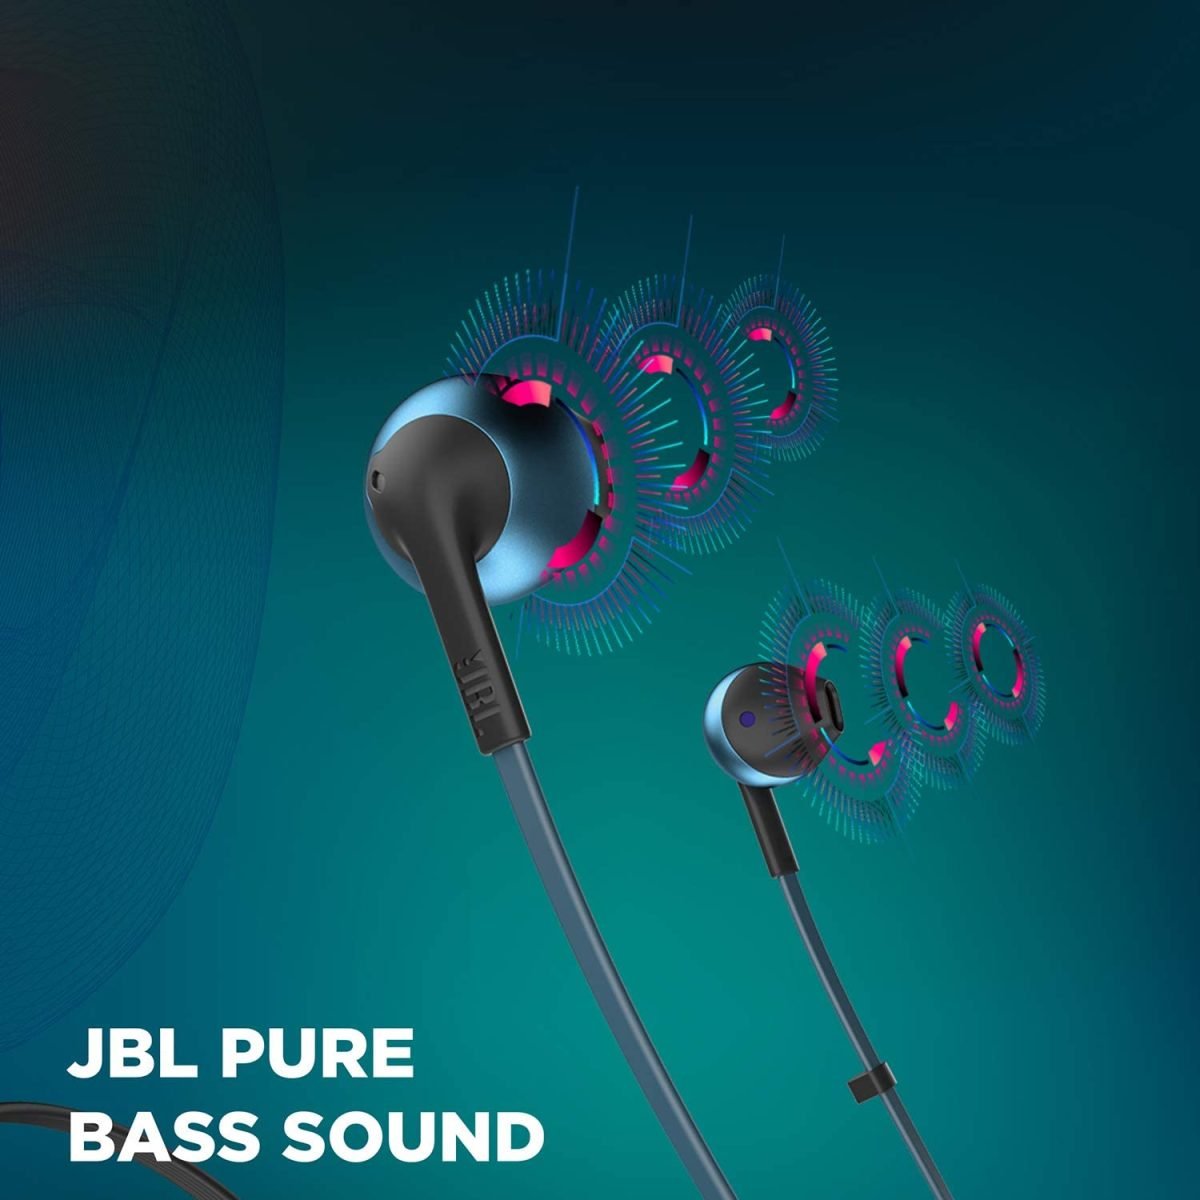 61Cpoqoecil. Ac Sl1500 Jbl &Lt;H1&Gt;Jbl Tune 205 Bluetooth Wireless Earbud Headphones-Blue&Lt;/H1&Gt; Introducing Jbl Tune 205Bt Wireless Earbud Headphones With Jbl Pure Bass Sound. Thanks To The 6-Hour (Max) Battery Life They Can Wirelessly Stream Jbl Pure Bass Sound And Provide Hands-Free Call Management. Inside The Premium Housing Is A Pair Of 12.5 Mm Drivers Which Will Punch Out Some Serious Bass, While The Soft, Ergonomically Shaped Earbuds Ensure The Listening Experience Remains Comfortable For Long-Listening Hours. In Addition, A Single-Button Remote Lets You Control Music Playback, As Well As Answer Calls On The Fly With The Built-In Microphone, Making The Jbl Tune 205Bt Your Everyday Companion For Work, At Home And On The Go. Jbl Bluetooth Jbl Tune 205 Bluetooth Wireless Earbud Headphones-Blue